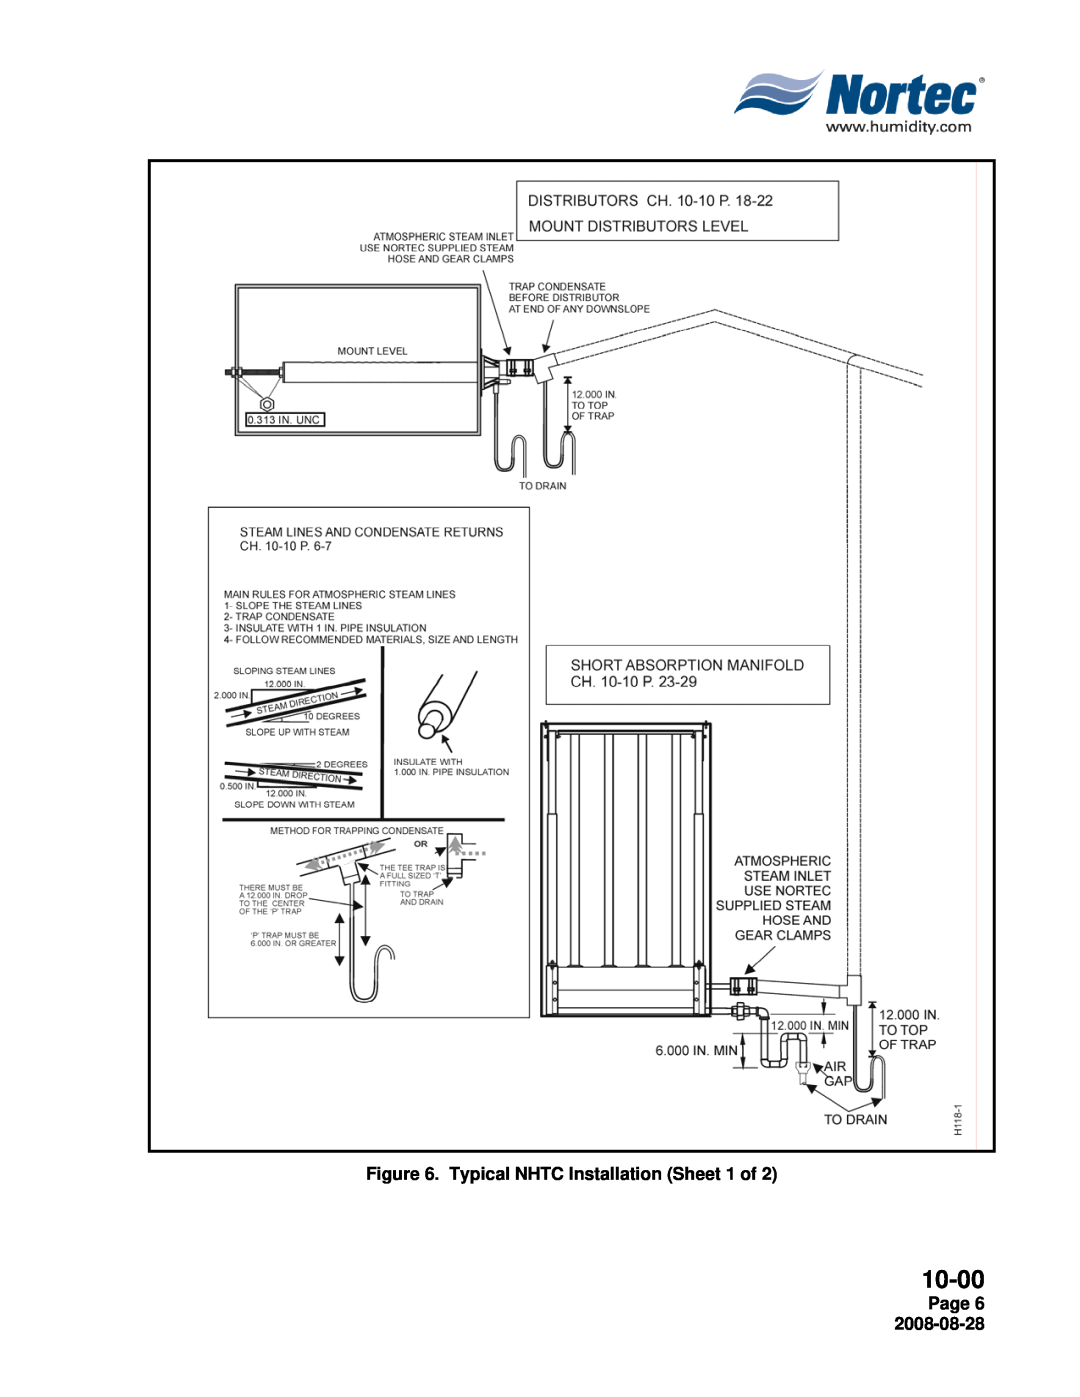 Nortec NH Series installation manual 10-00, Typical NHTC Installation Sheet 1 of, Page 6 